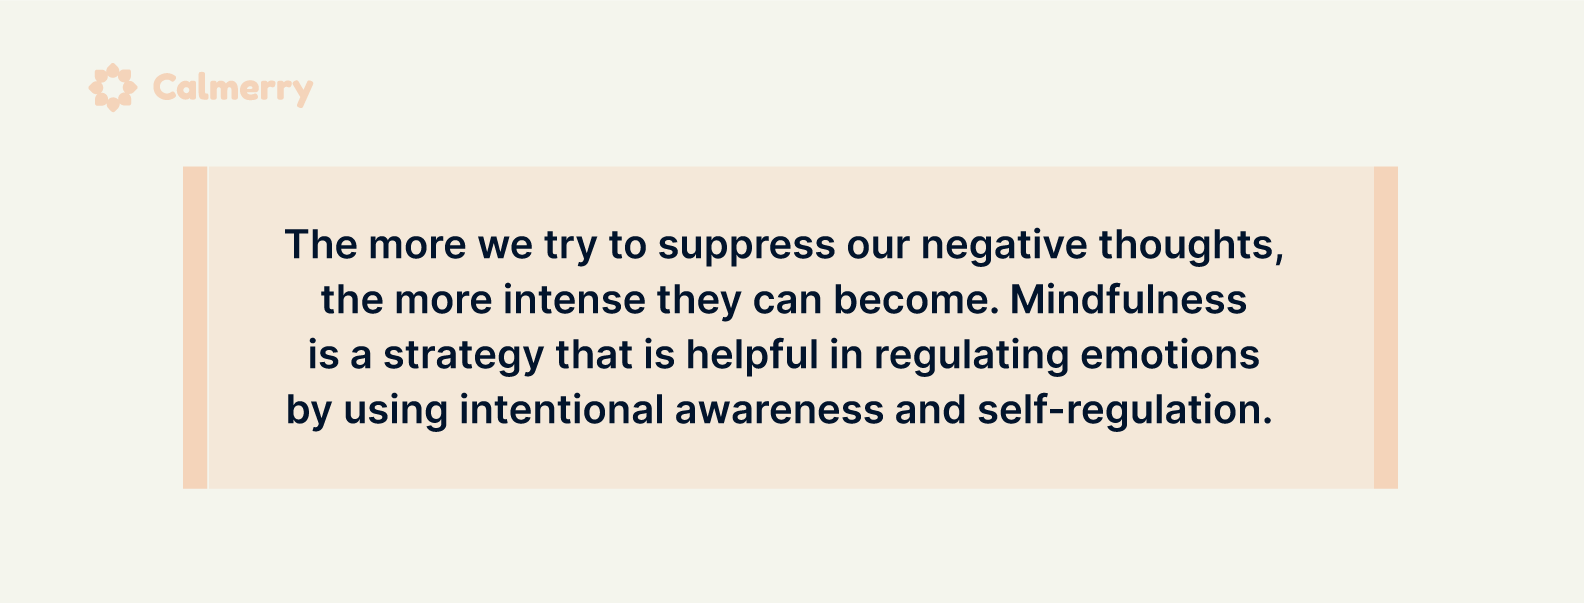 Mindfulness has been suggested as a practice that can help promote post-traumatic growth